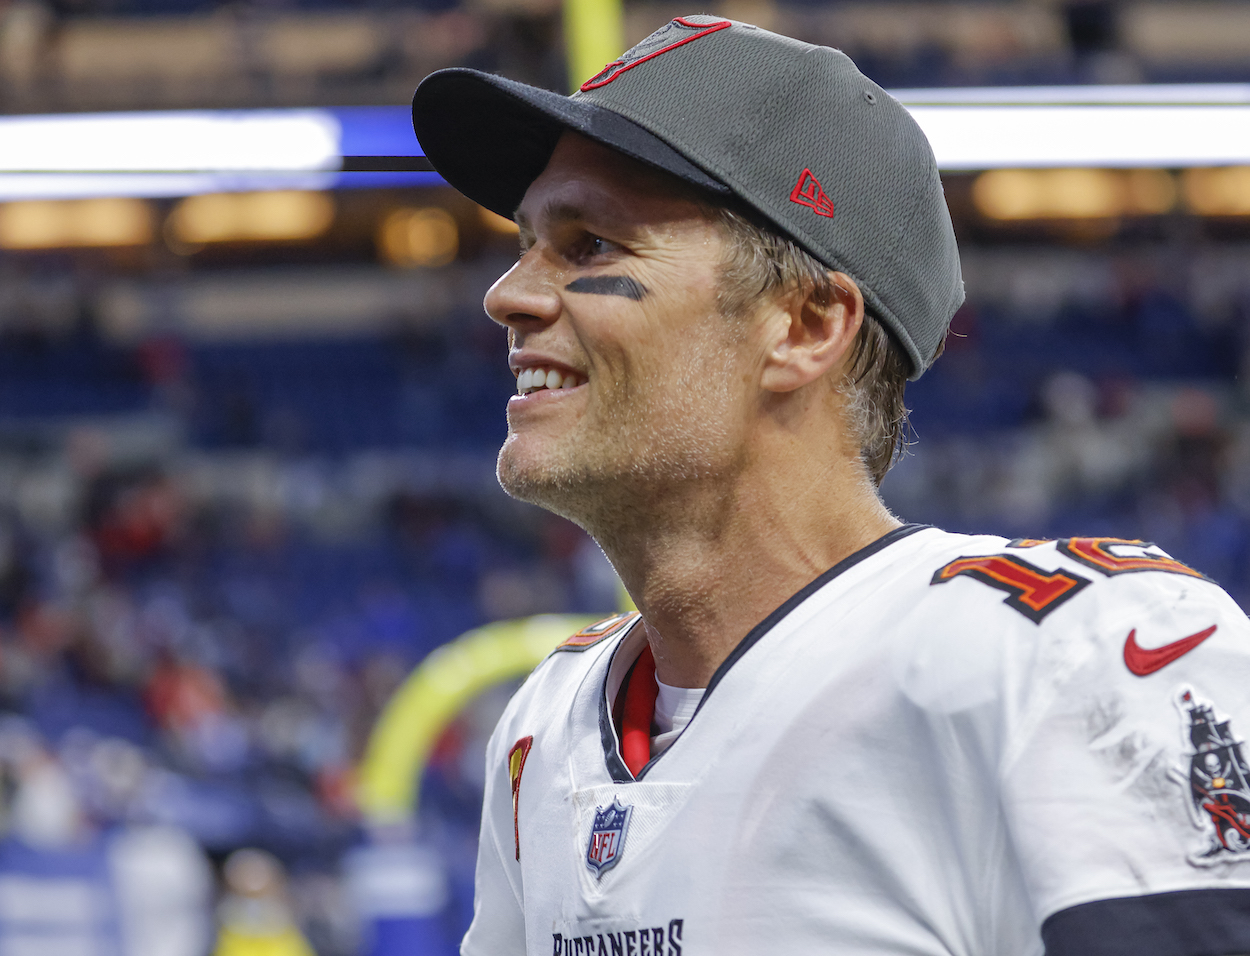 Tom Brady of the Tampa Bay Buccaneers is seen after the game against the Indianapolis Colts at Lucas Oil Stadium on November 28, 2021 in Indianapolis, Indiana.